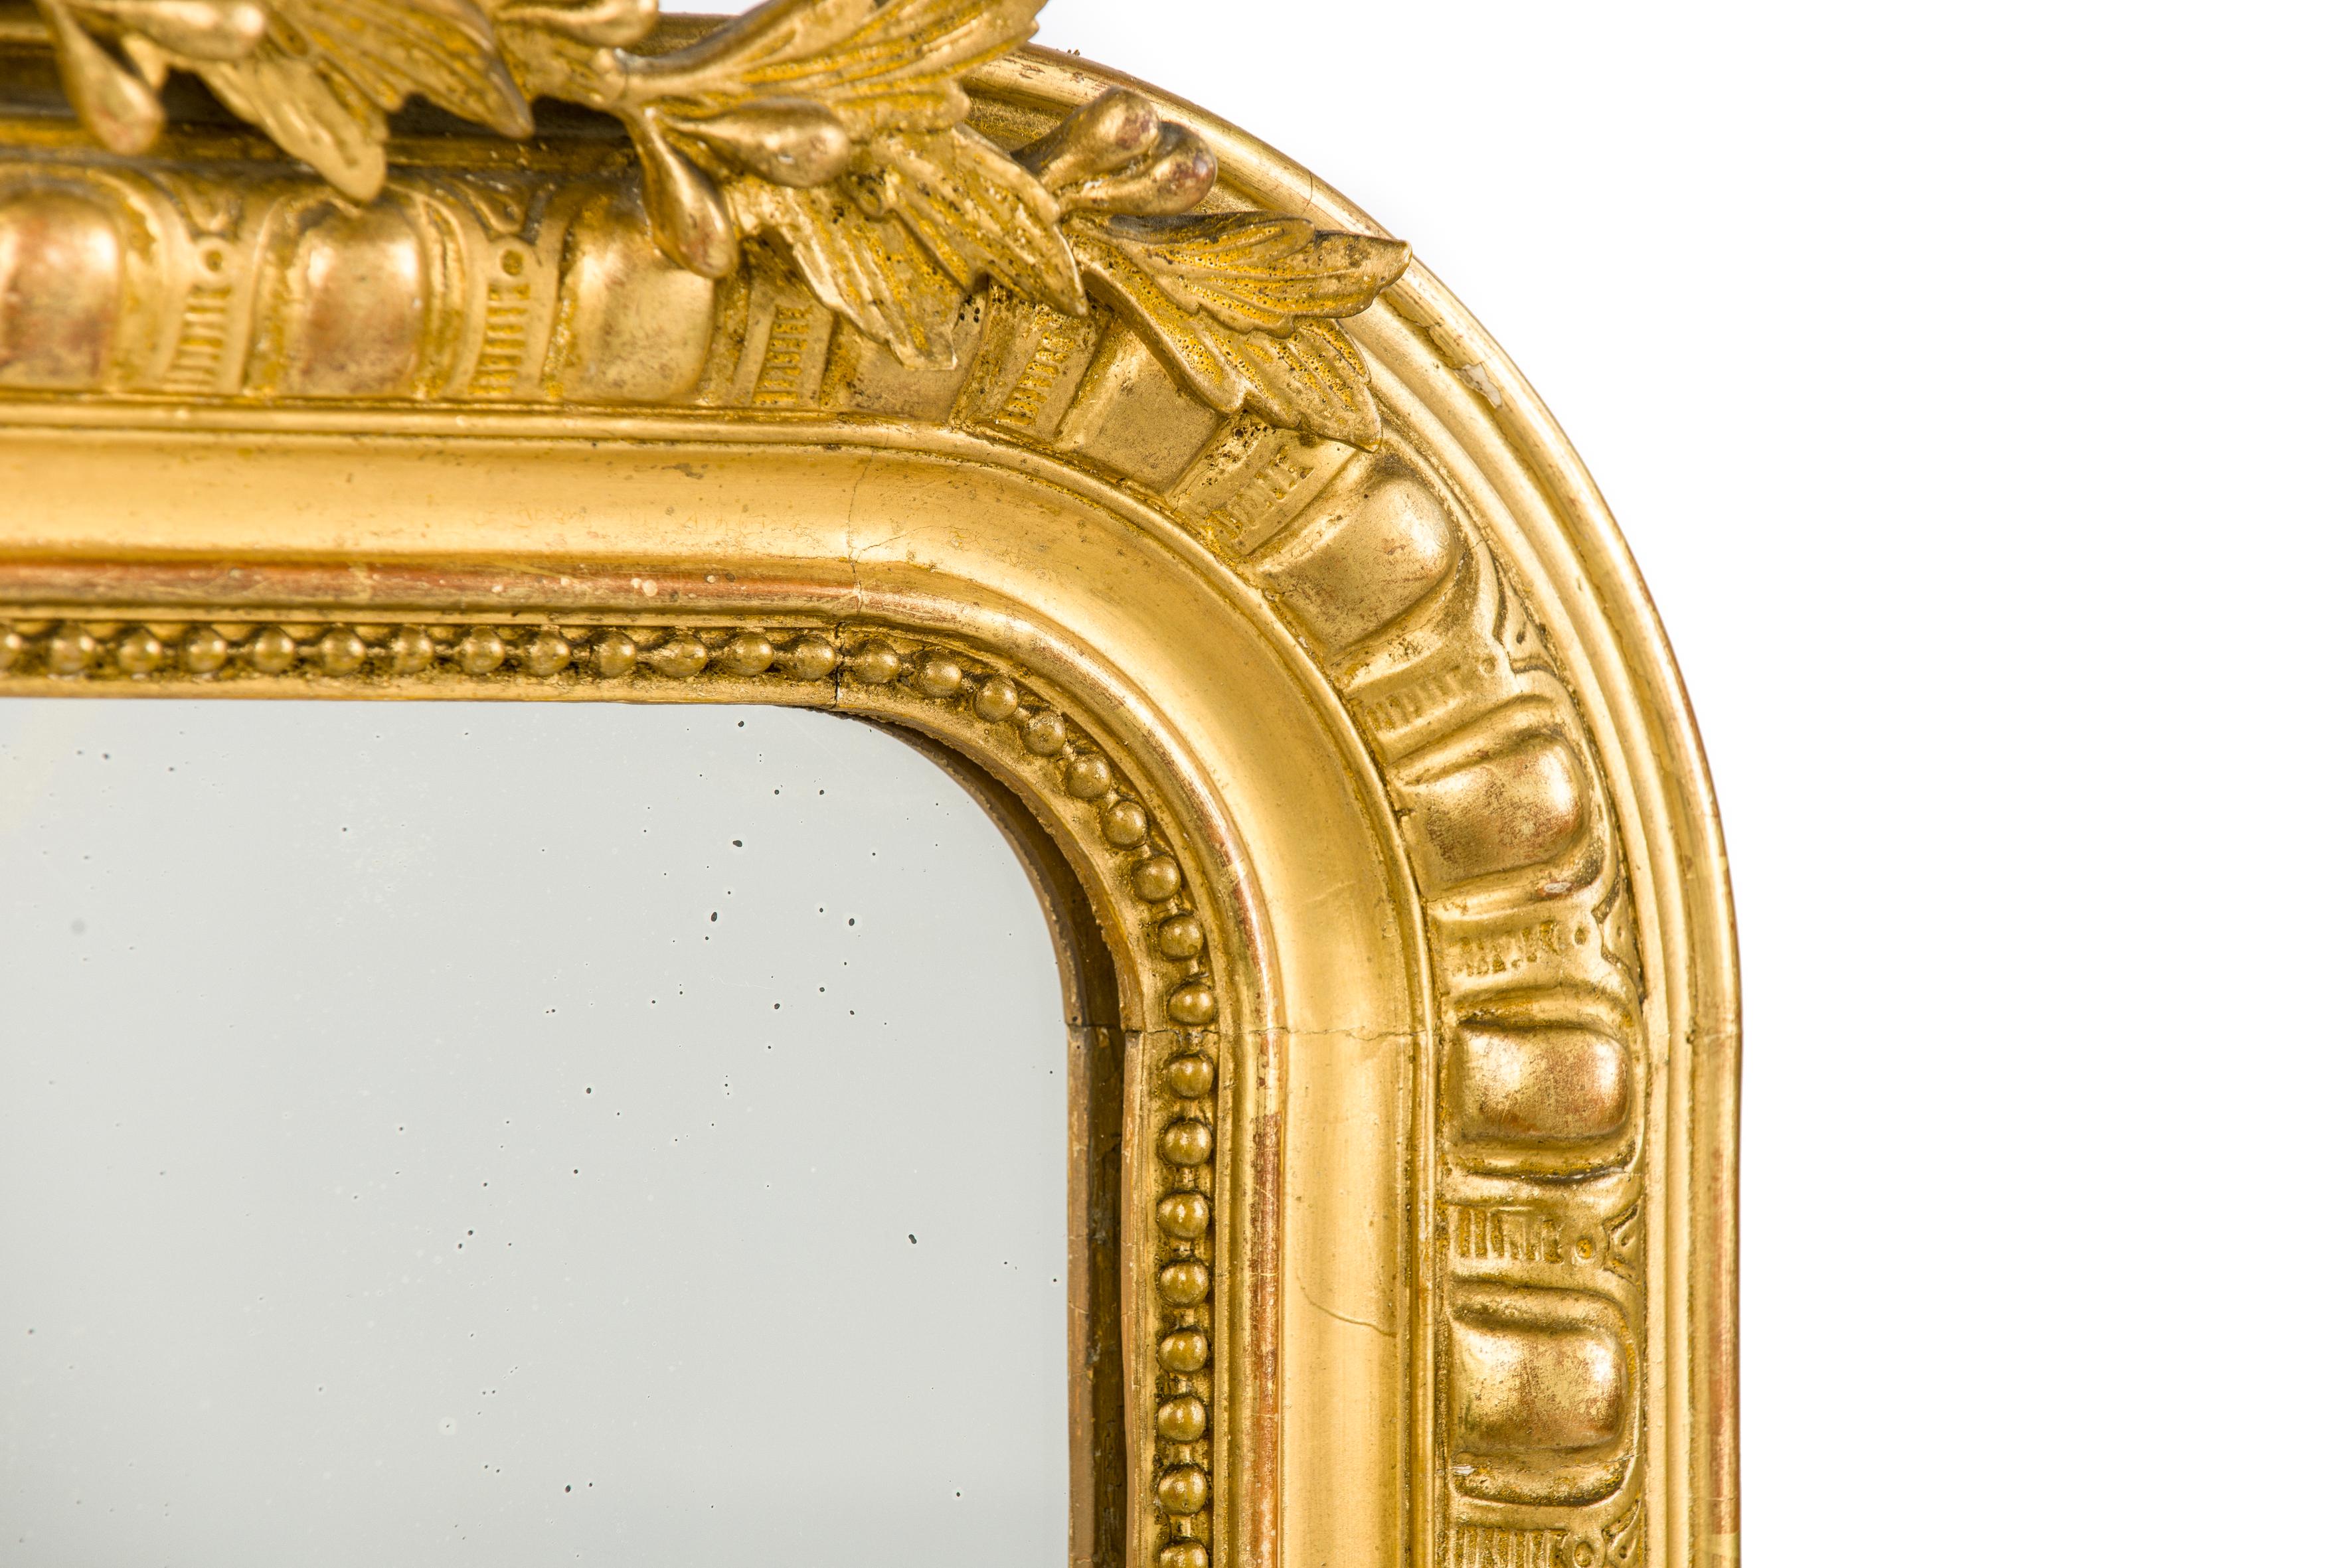 Polished Antique 19th-Century Gadrooned French Gold Leaf Gilt Louis Philippe Mirror